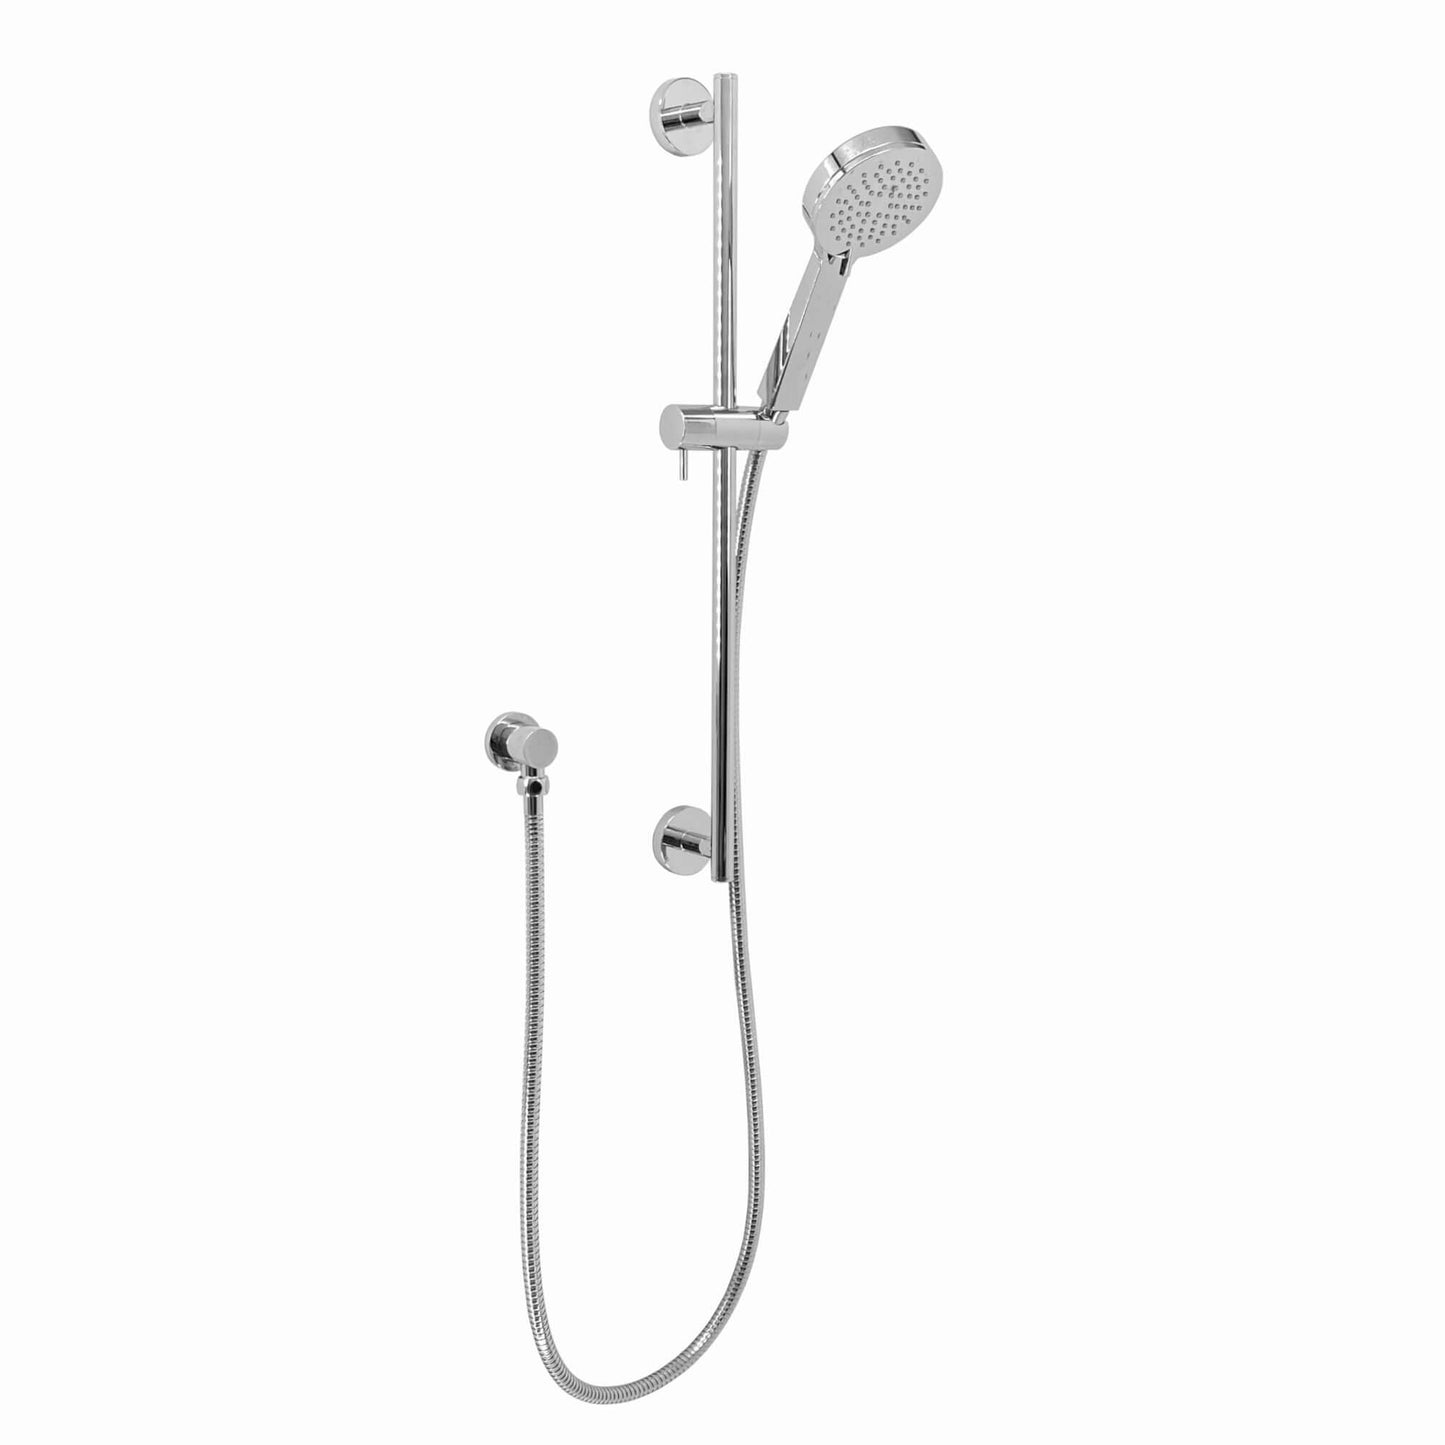 Contemporary Shower Slider Riser Rail Kit With 3 Function Shower Head, Hose and Wall Elbow - Chrome